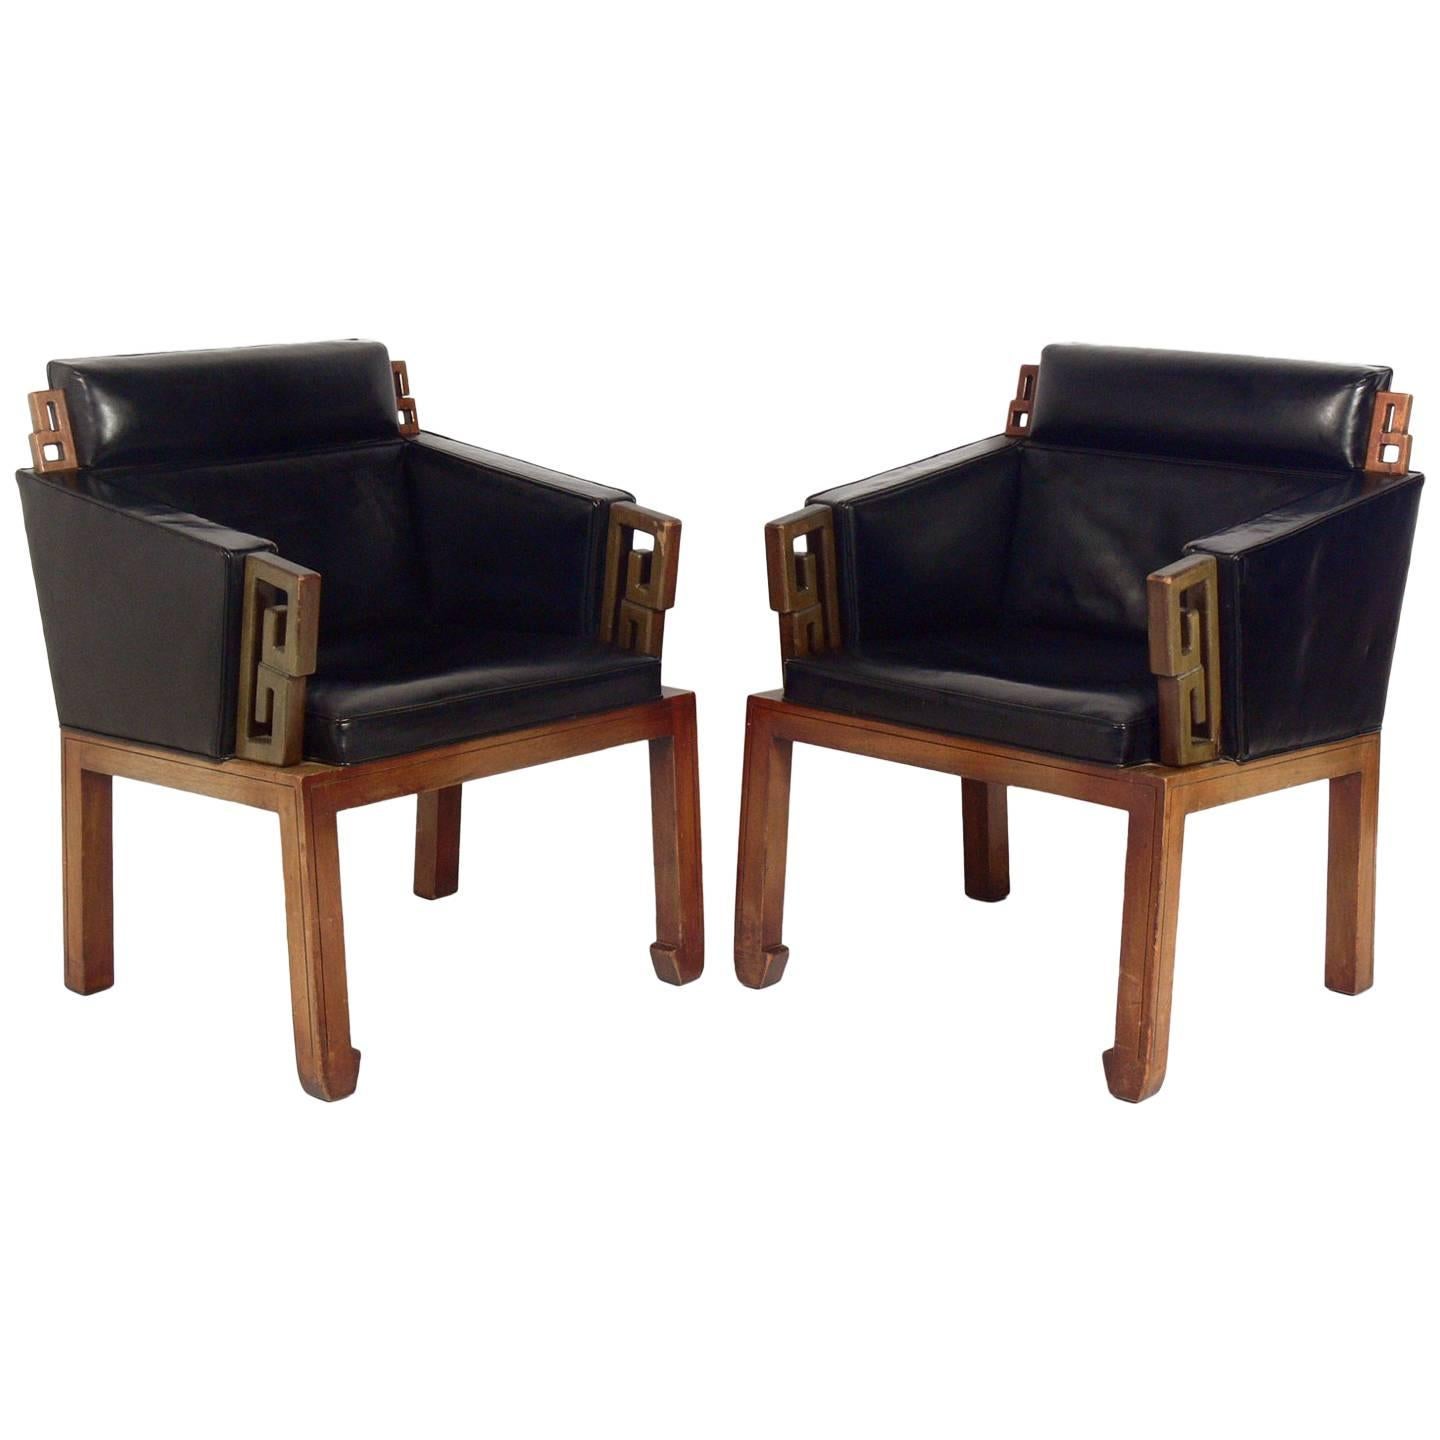 Pair of Asian Influenced Leather Lounge Chairs Attributed to James Mont